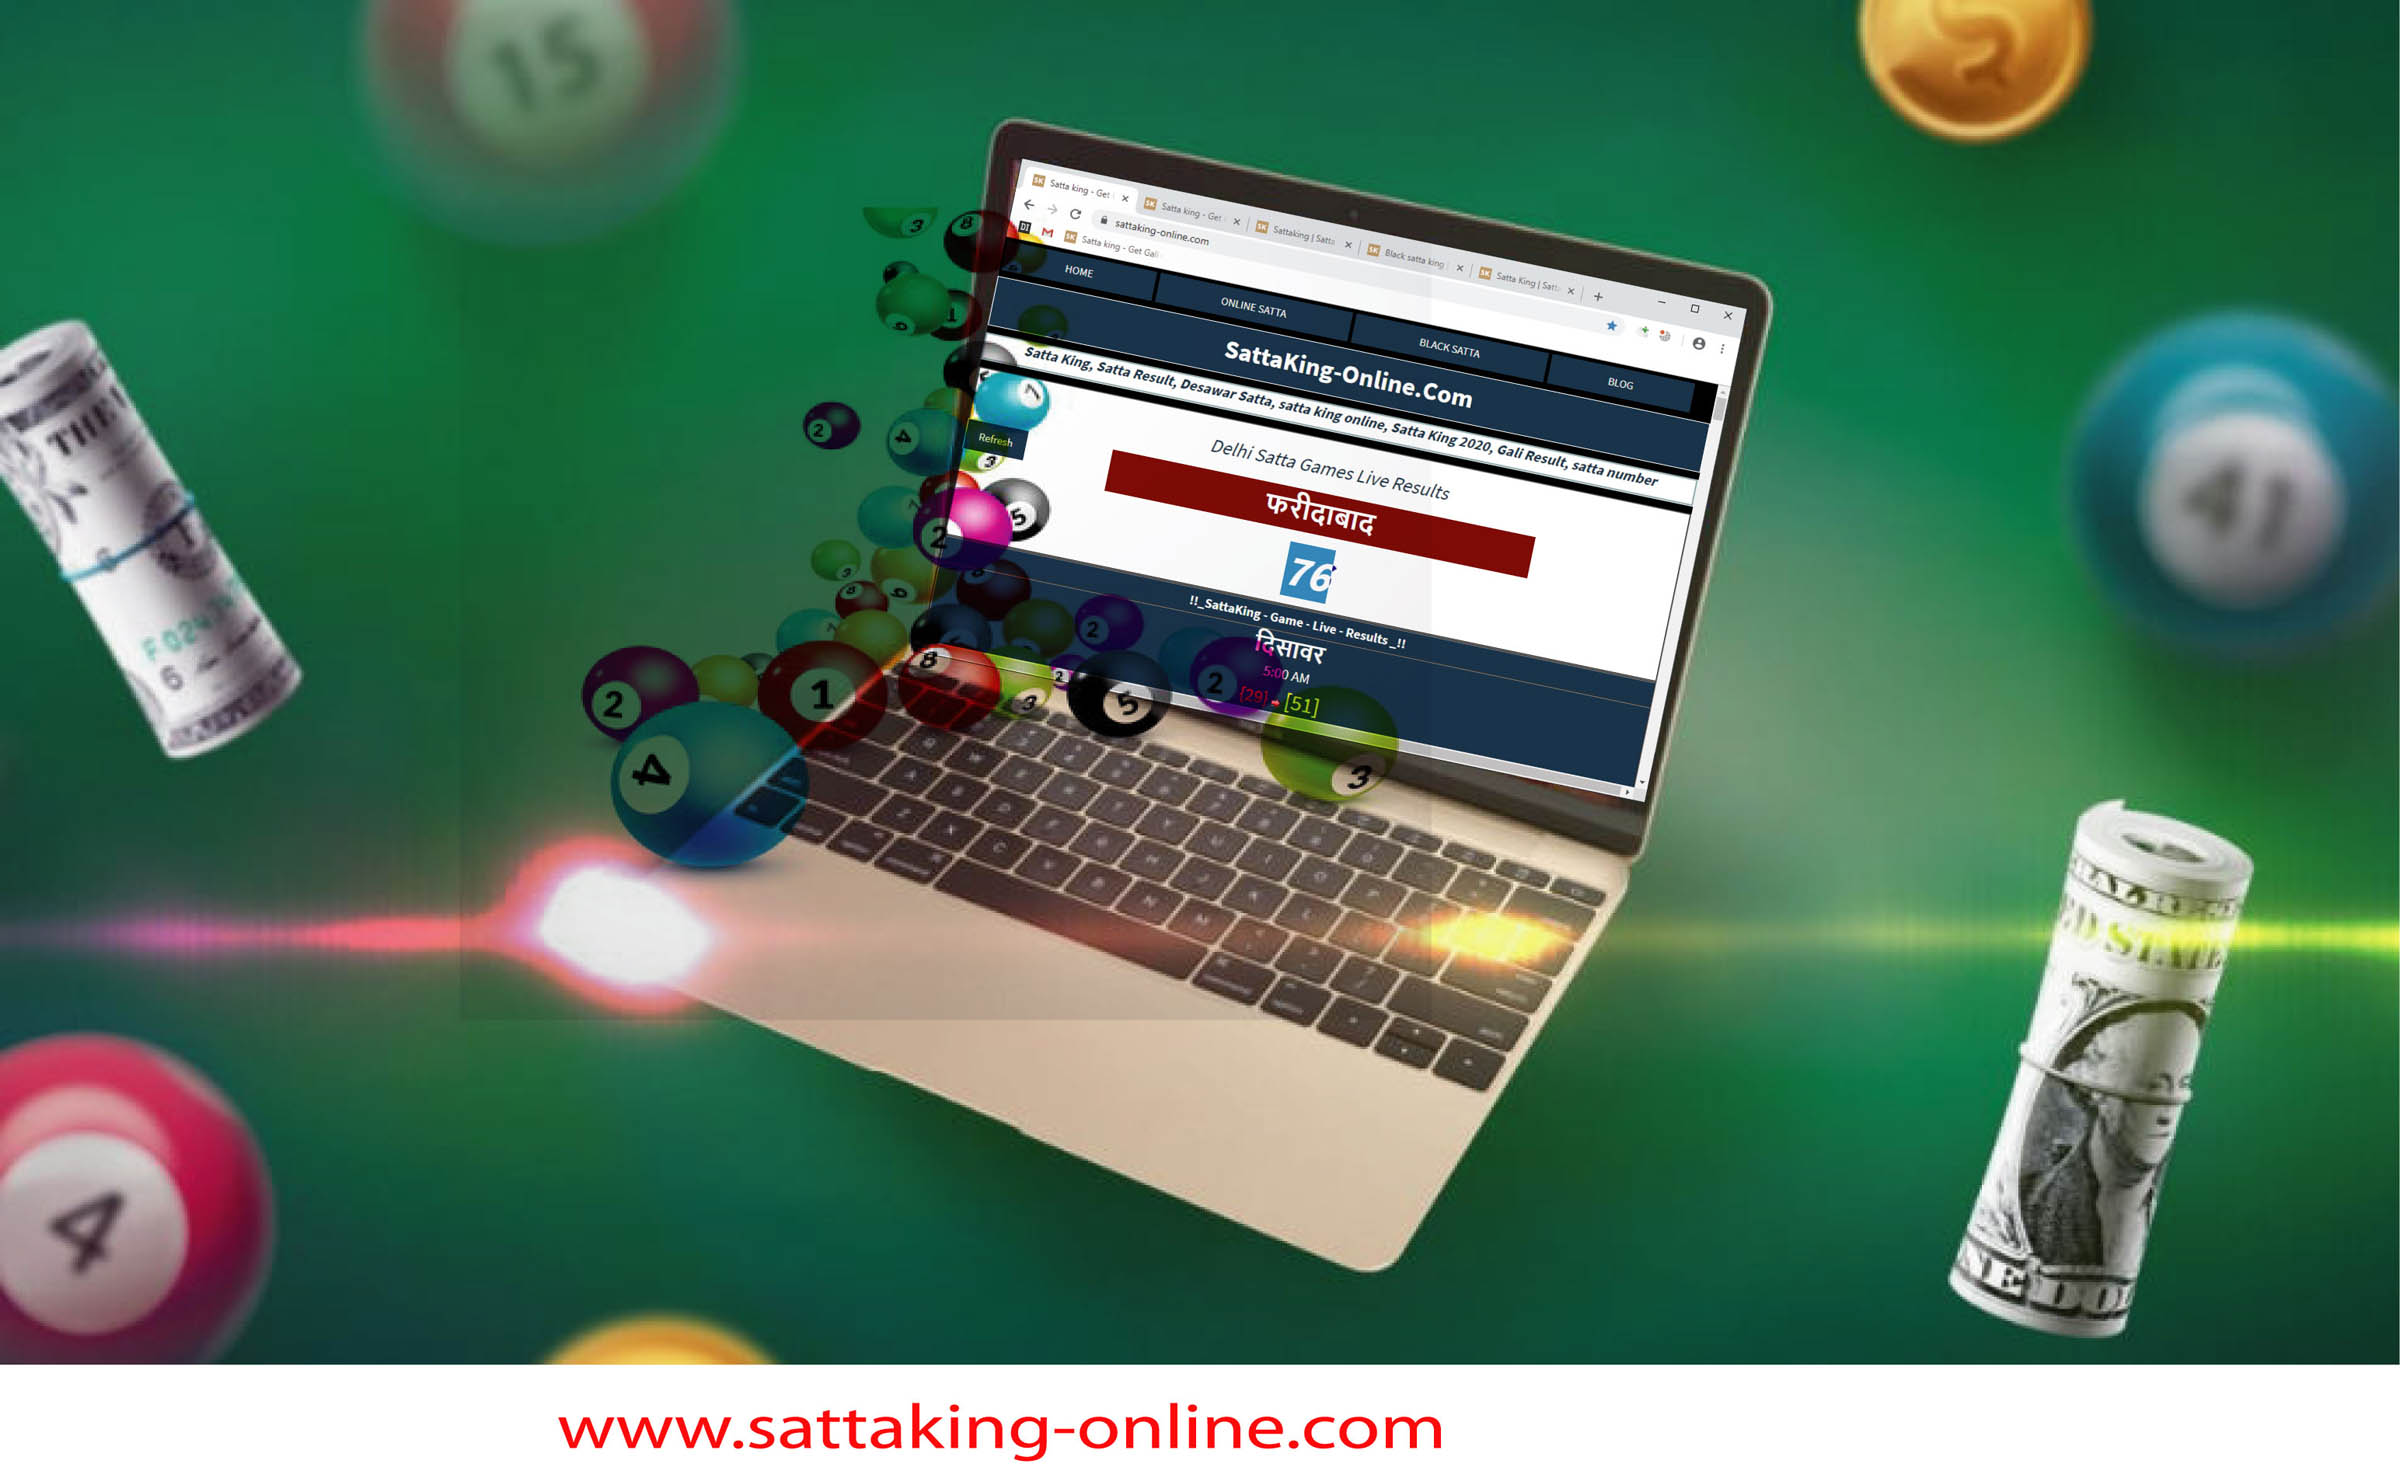 Satta Chart Indian Lottery Games – Obtain a Total Connection with Win Big Money Online